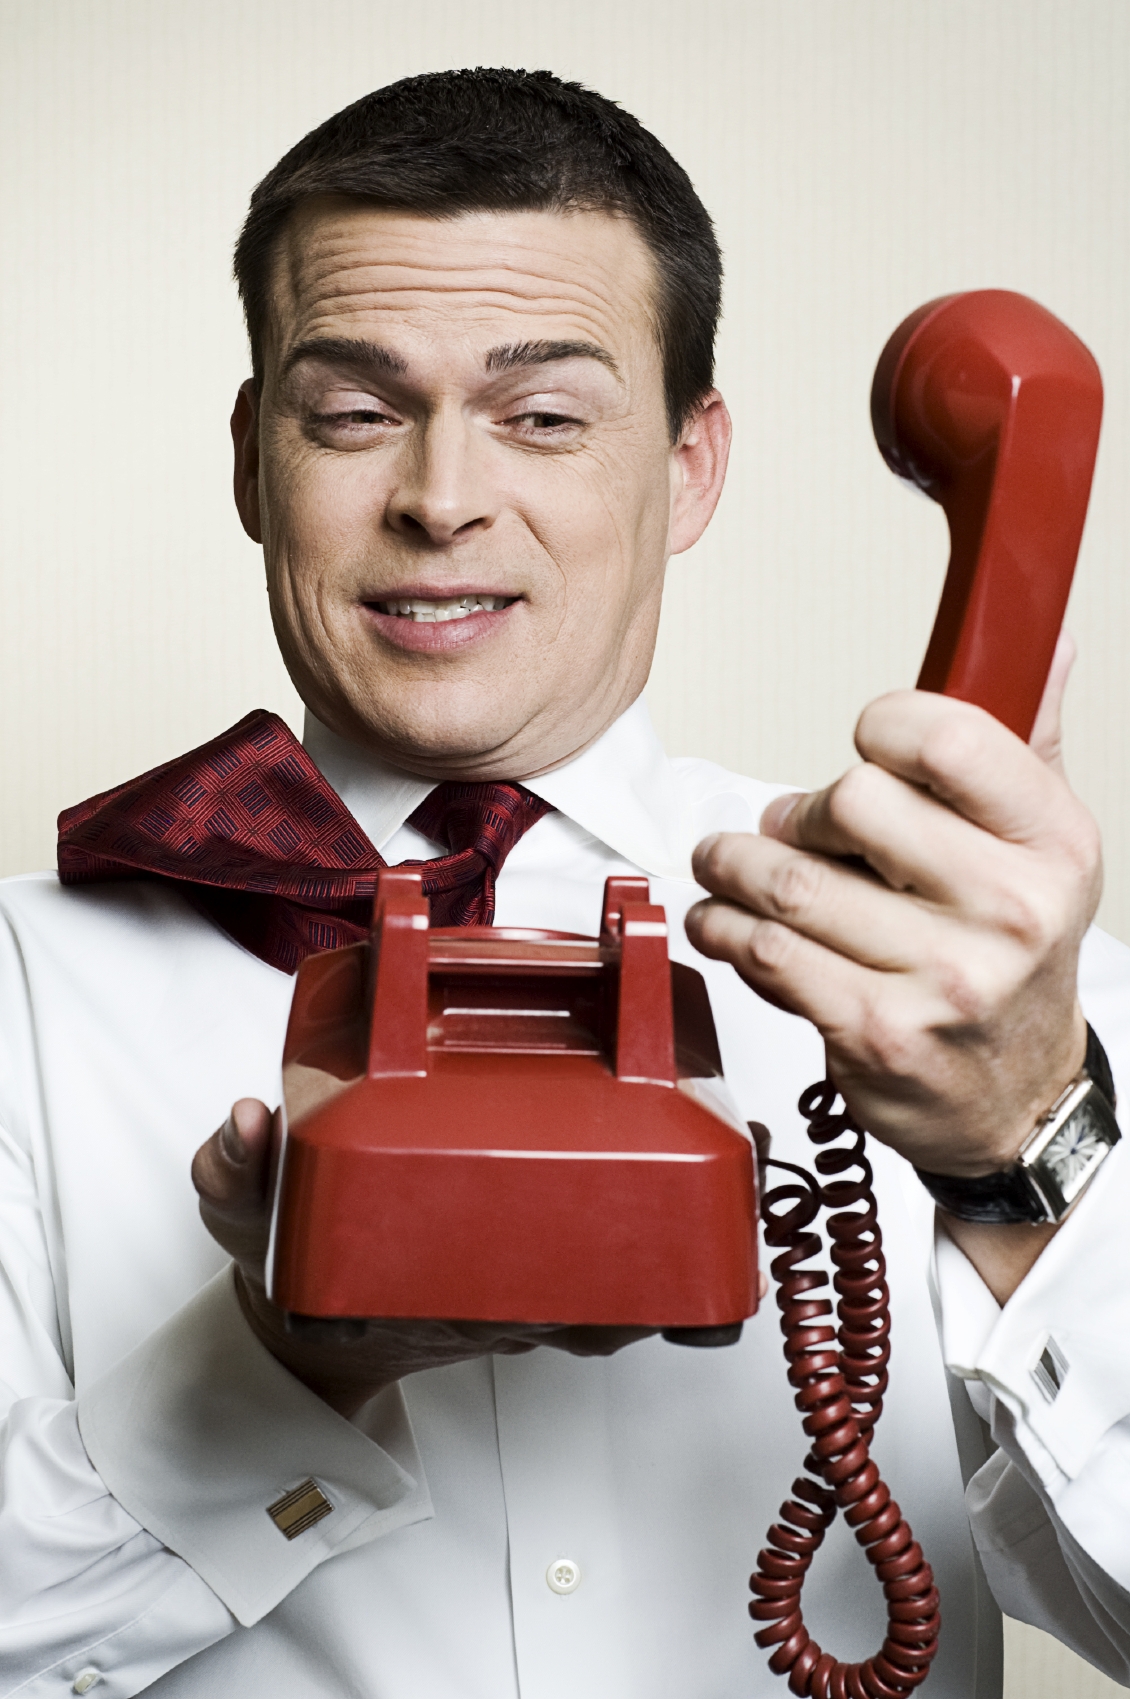 telephone from istock for opt in report